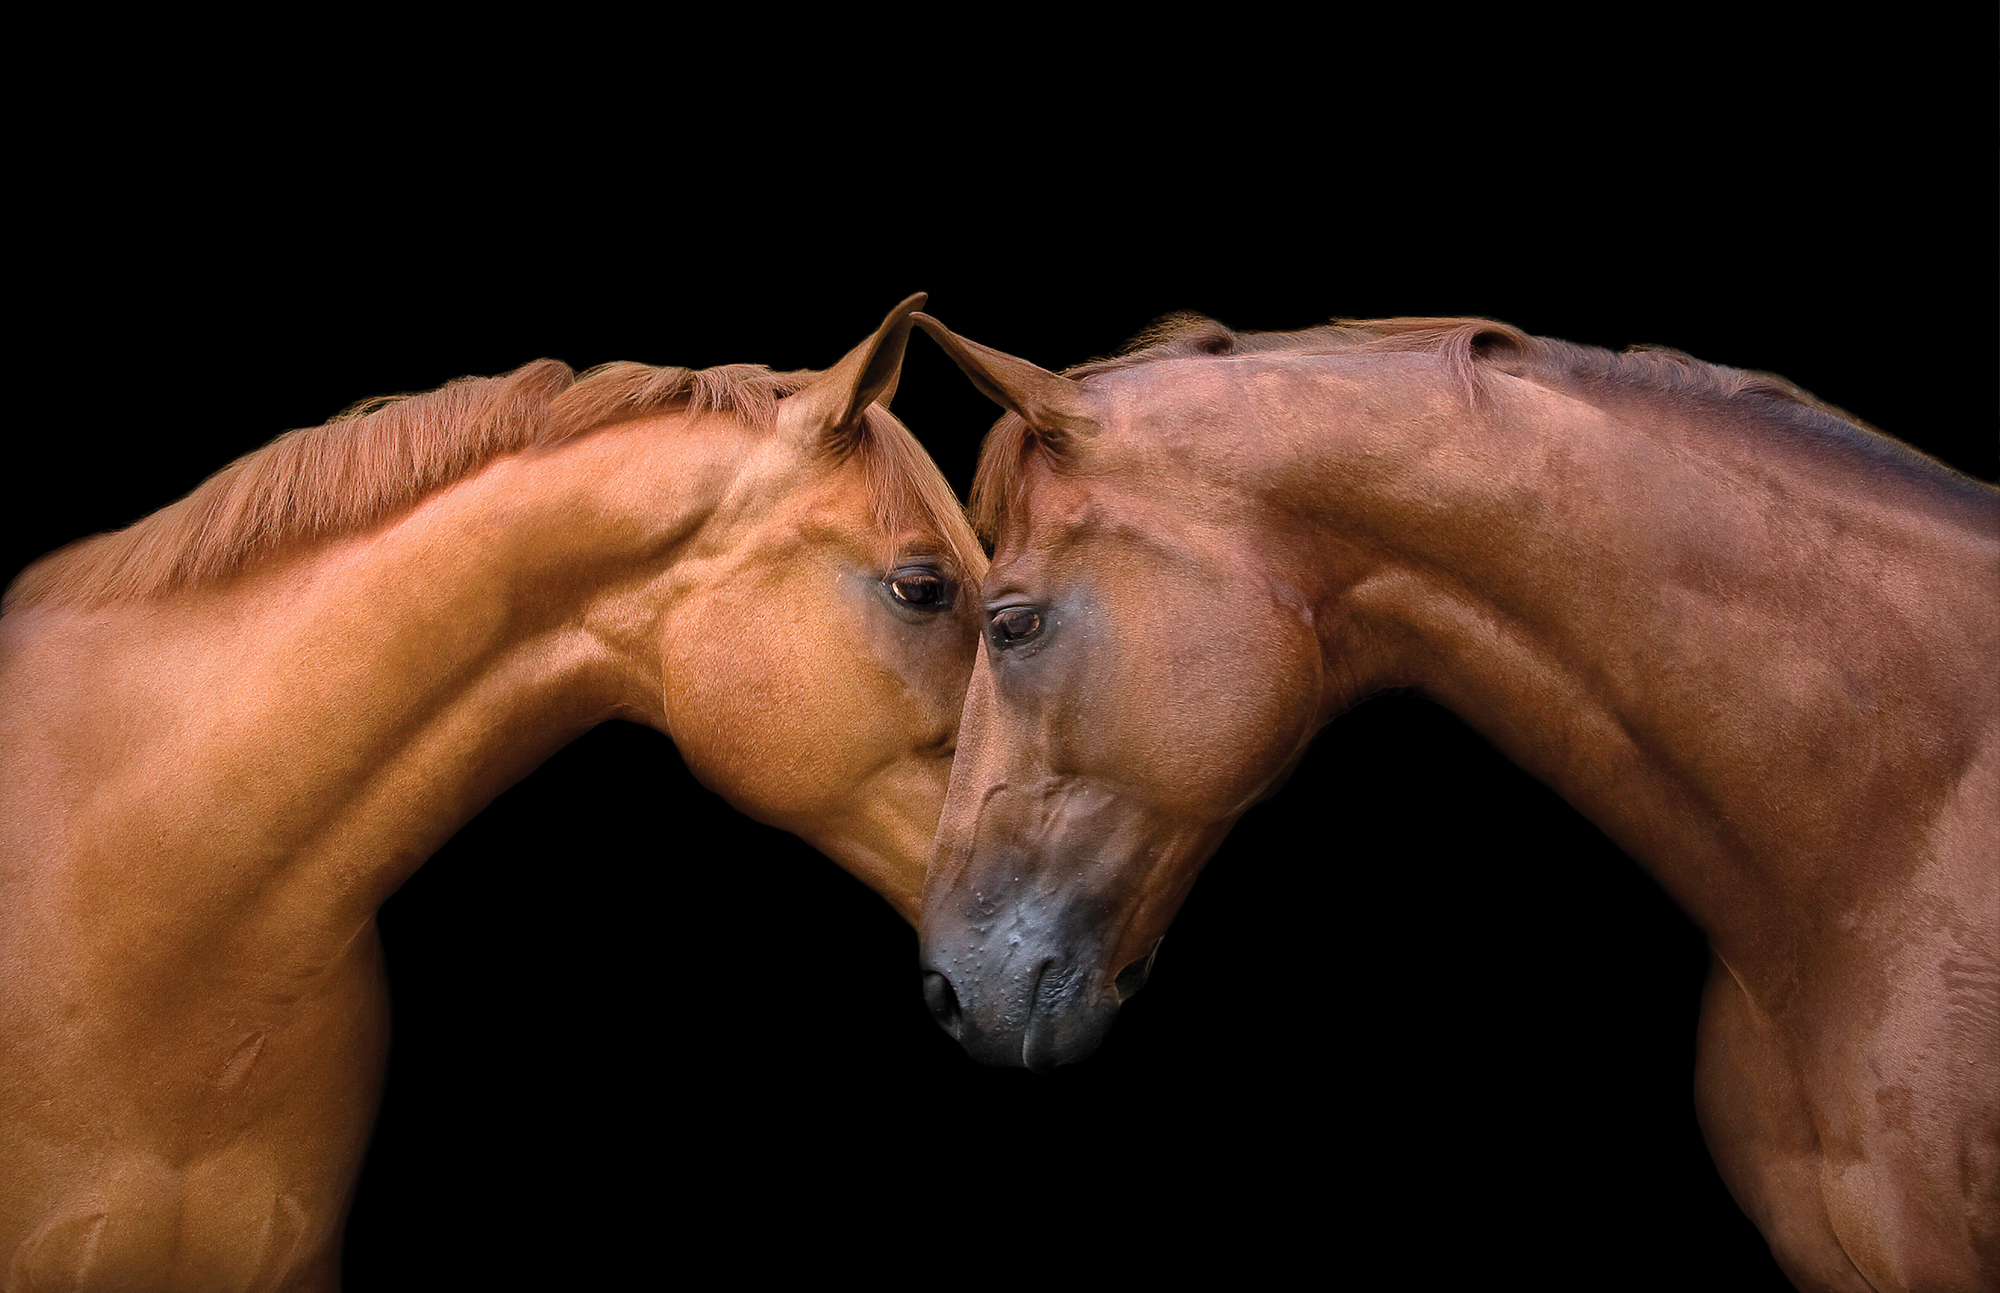 "Kissing Horses (Edition of 10/18)" by Bob Tabor